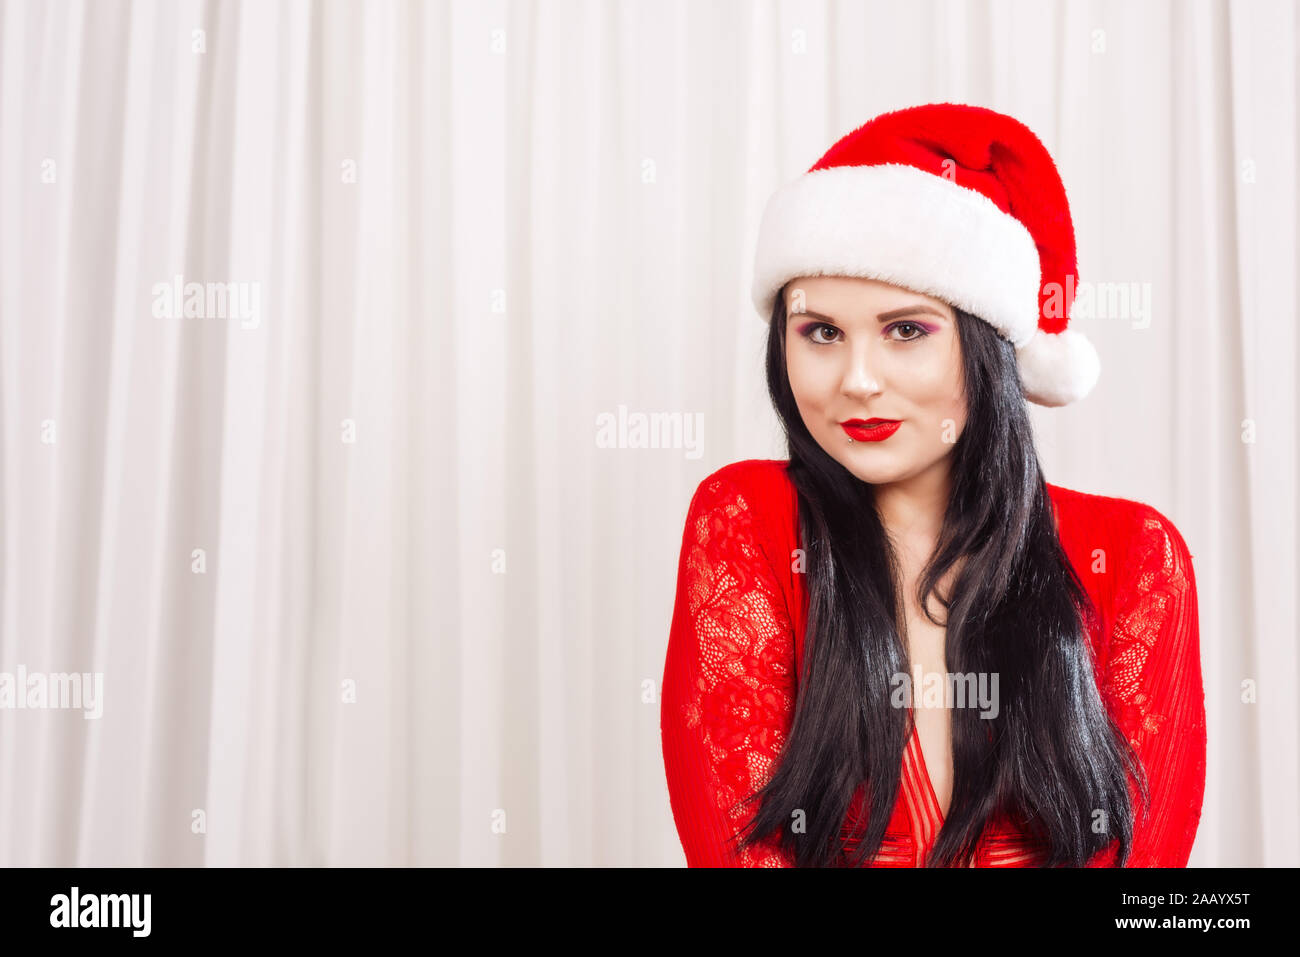 Woman wearing a Santa hat dressed in red lingerie Stock Photo